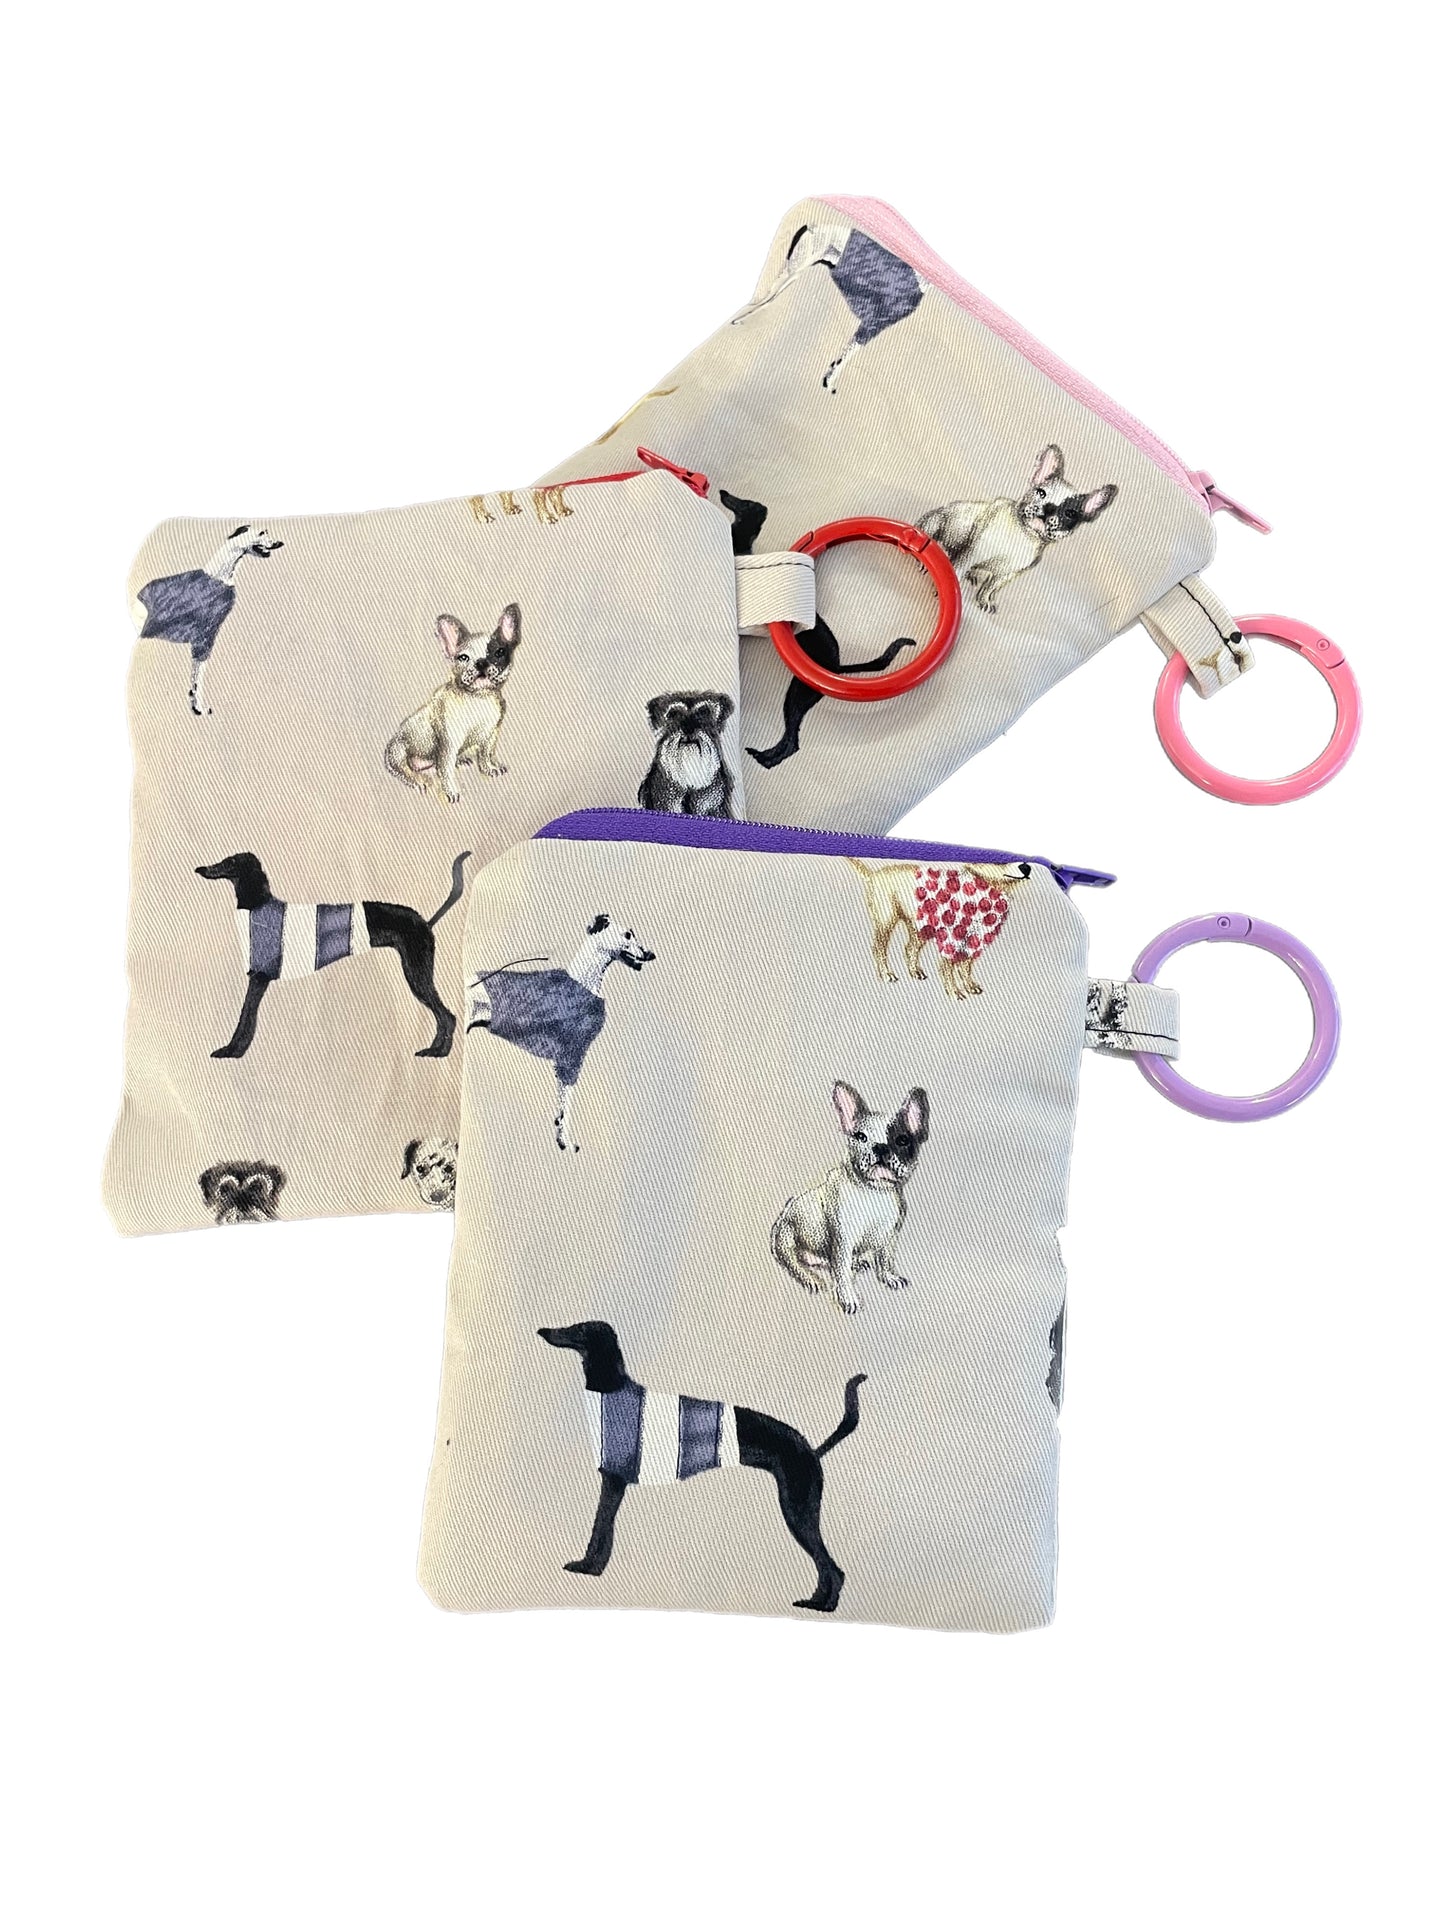 Greyhound feature go bags, treat/poo bag holder, coin bag